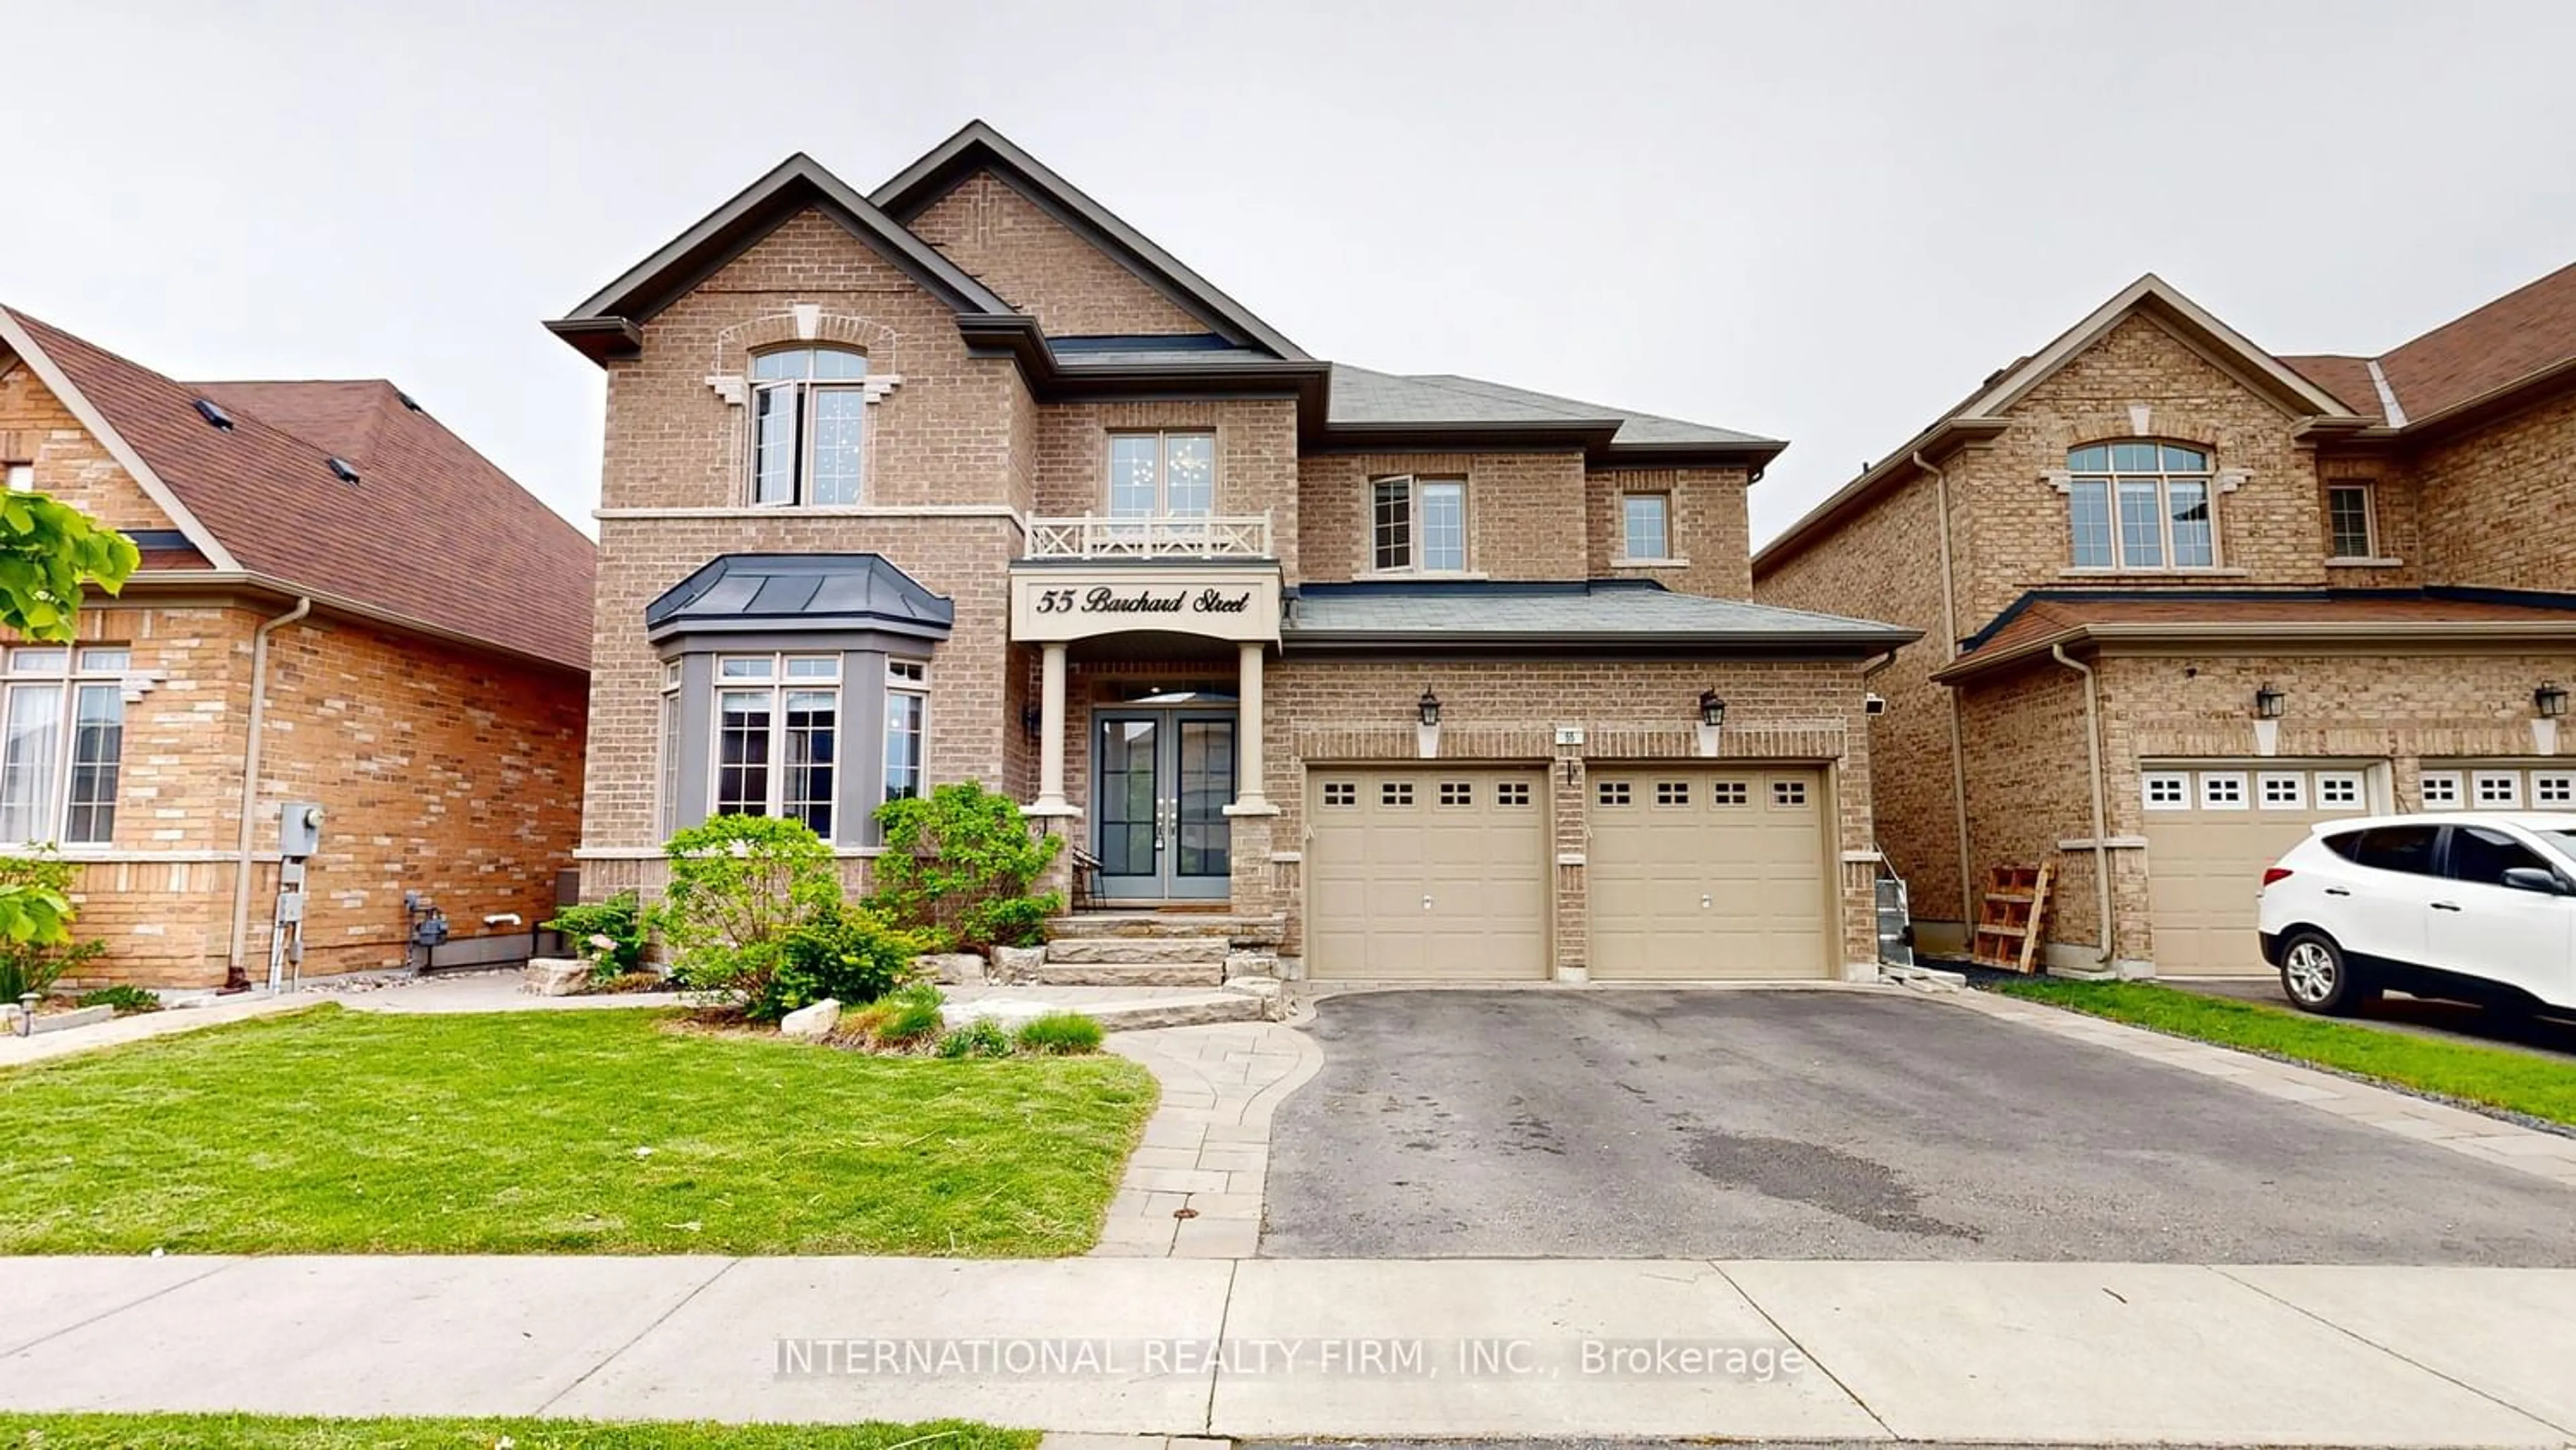 Home with brick exterior material for 55 Barchard St, Clarington Ontario L1B 0K8